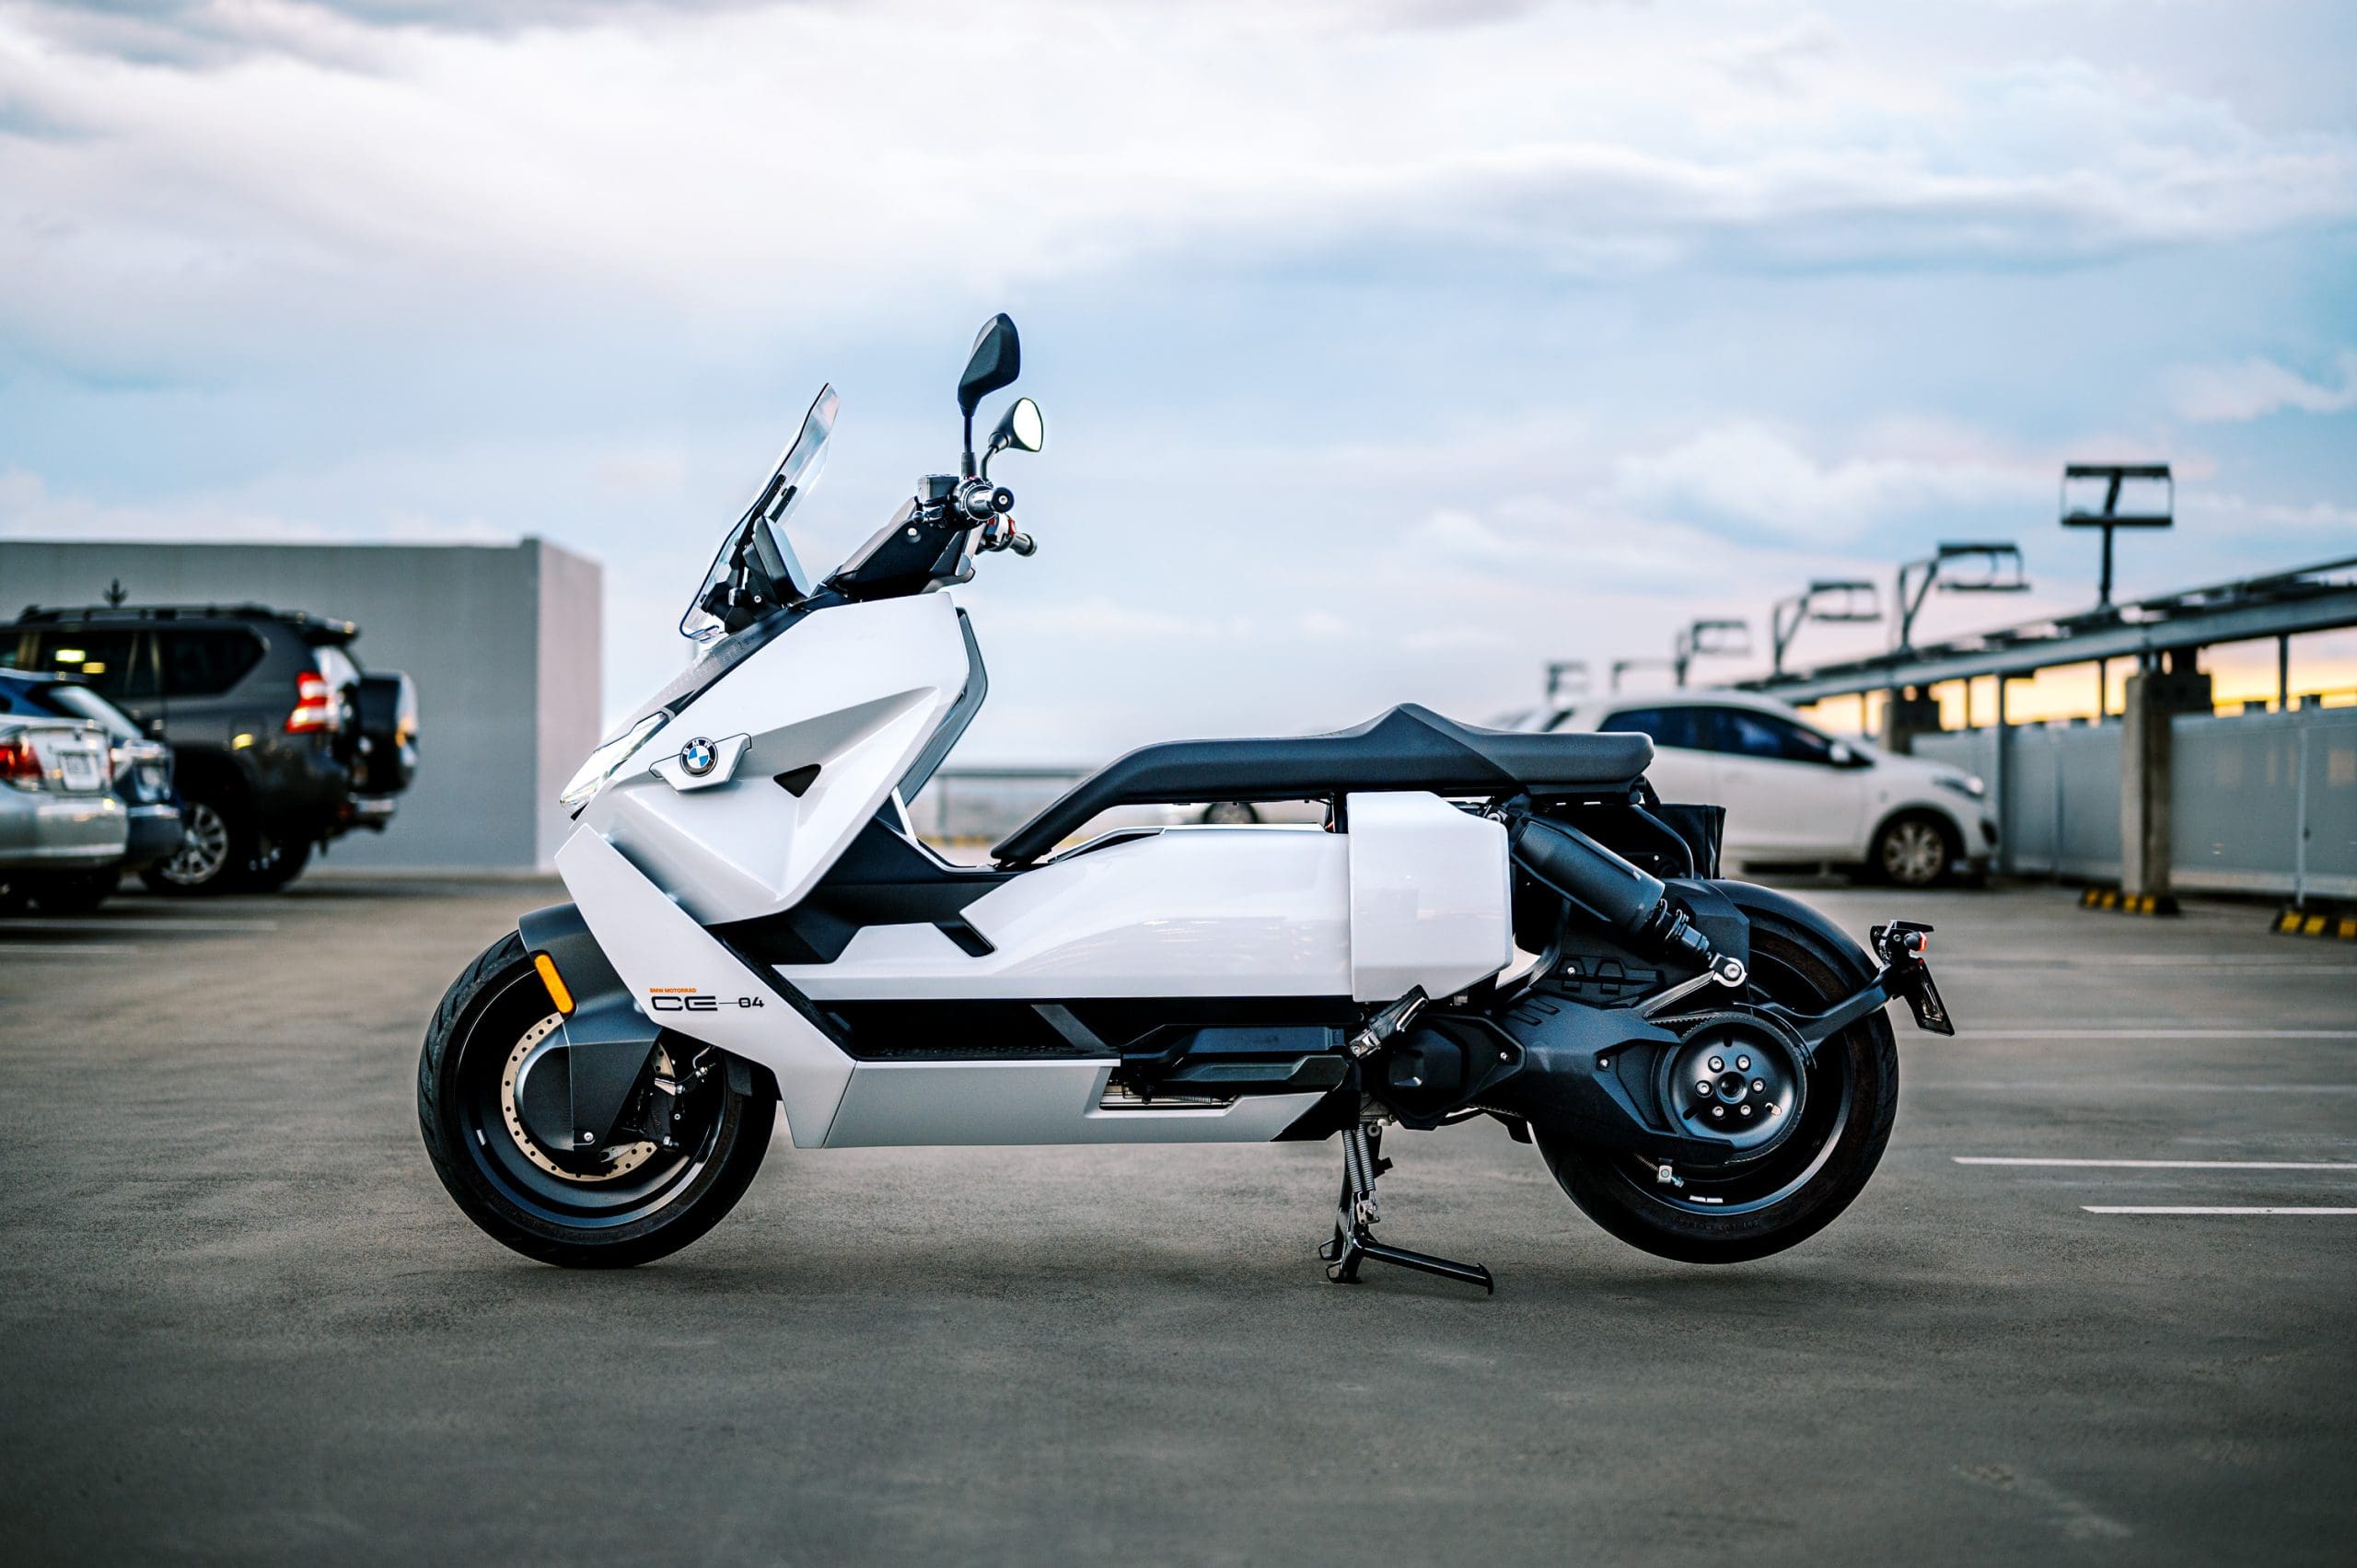 BMW's CE-04 electric scooter on a carpark rooftop at sunset